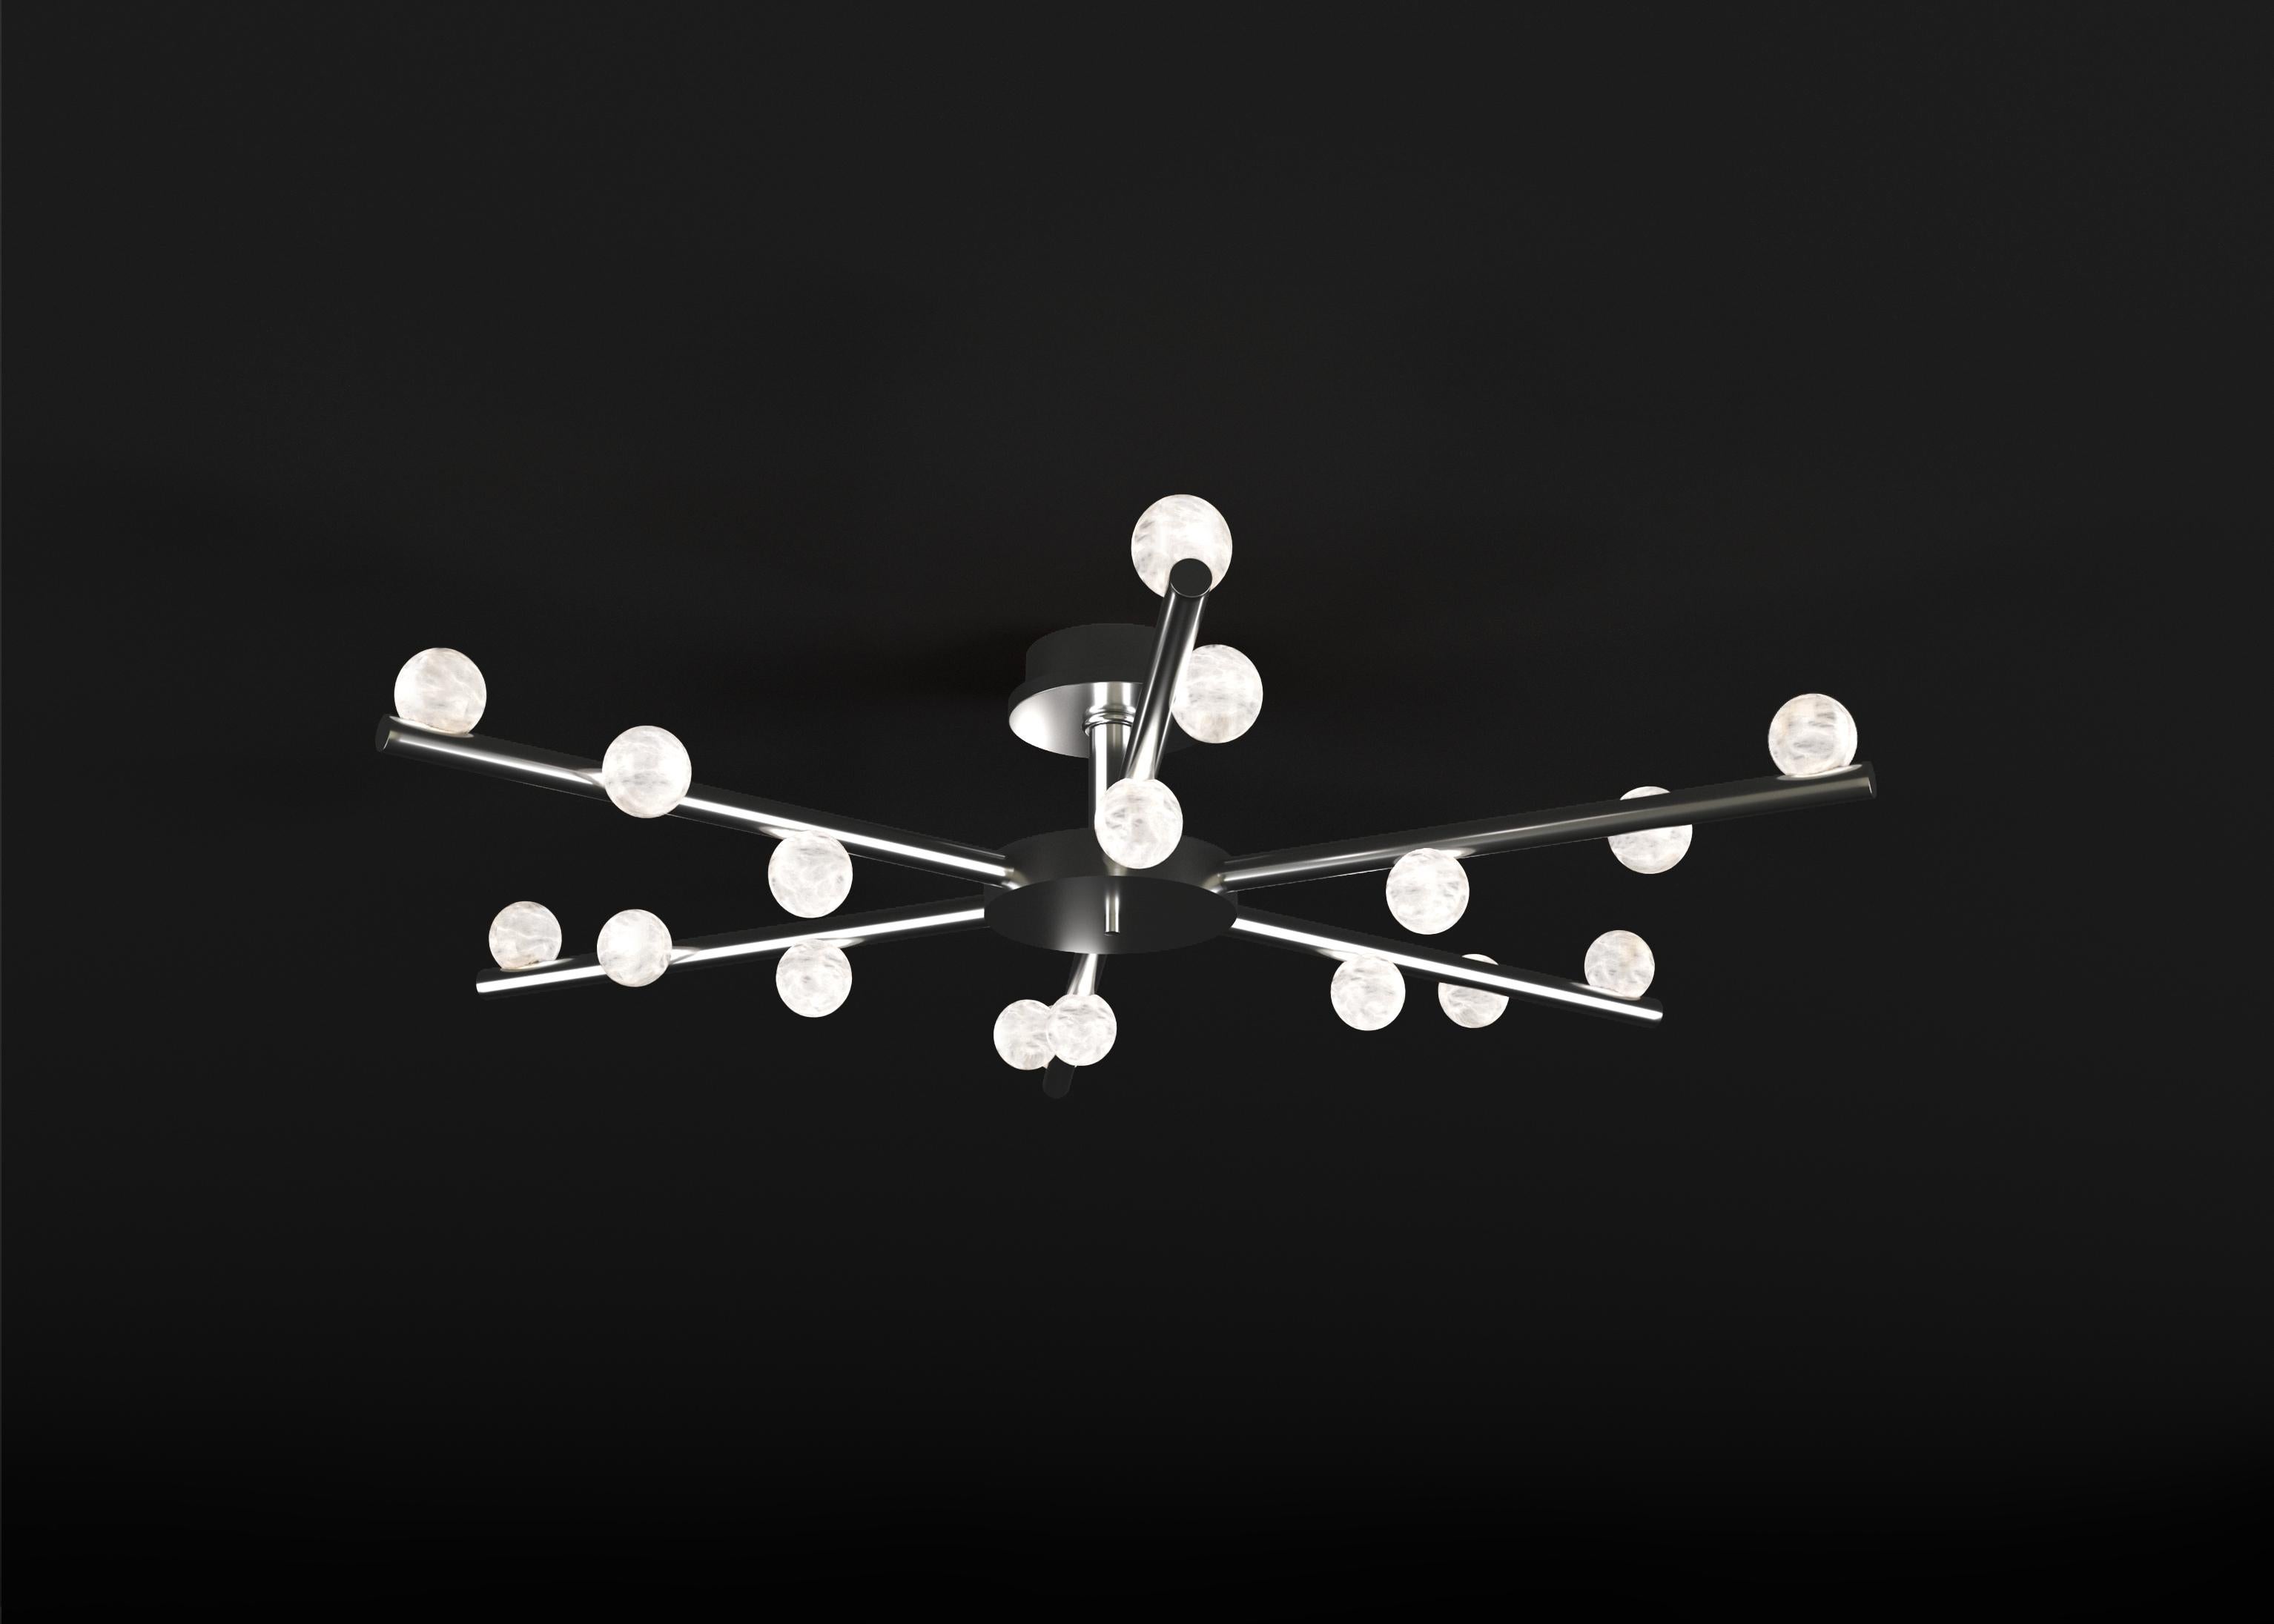 Demetra Shiny Silver Metal Ceiling Lamp by Alabastro Italiano
Dimensions: D 85 x W 97 x H 22 cm.
Materials: White alabaster and shiny silver metal.

Available in different finishes: Shiny Silver, Bronze, Brushed Brass, Ruggine of Florence, Brushed